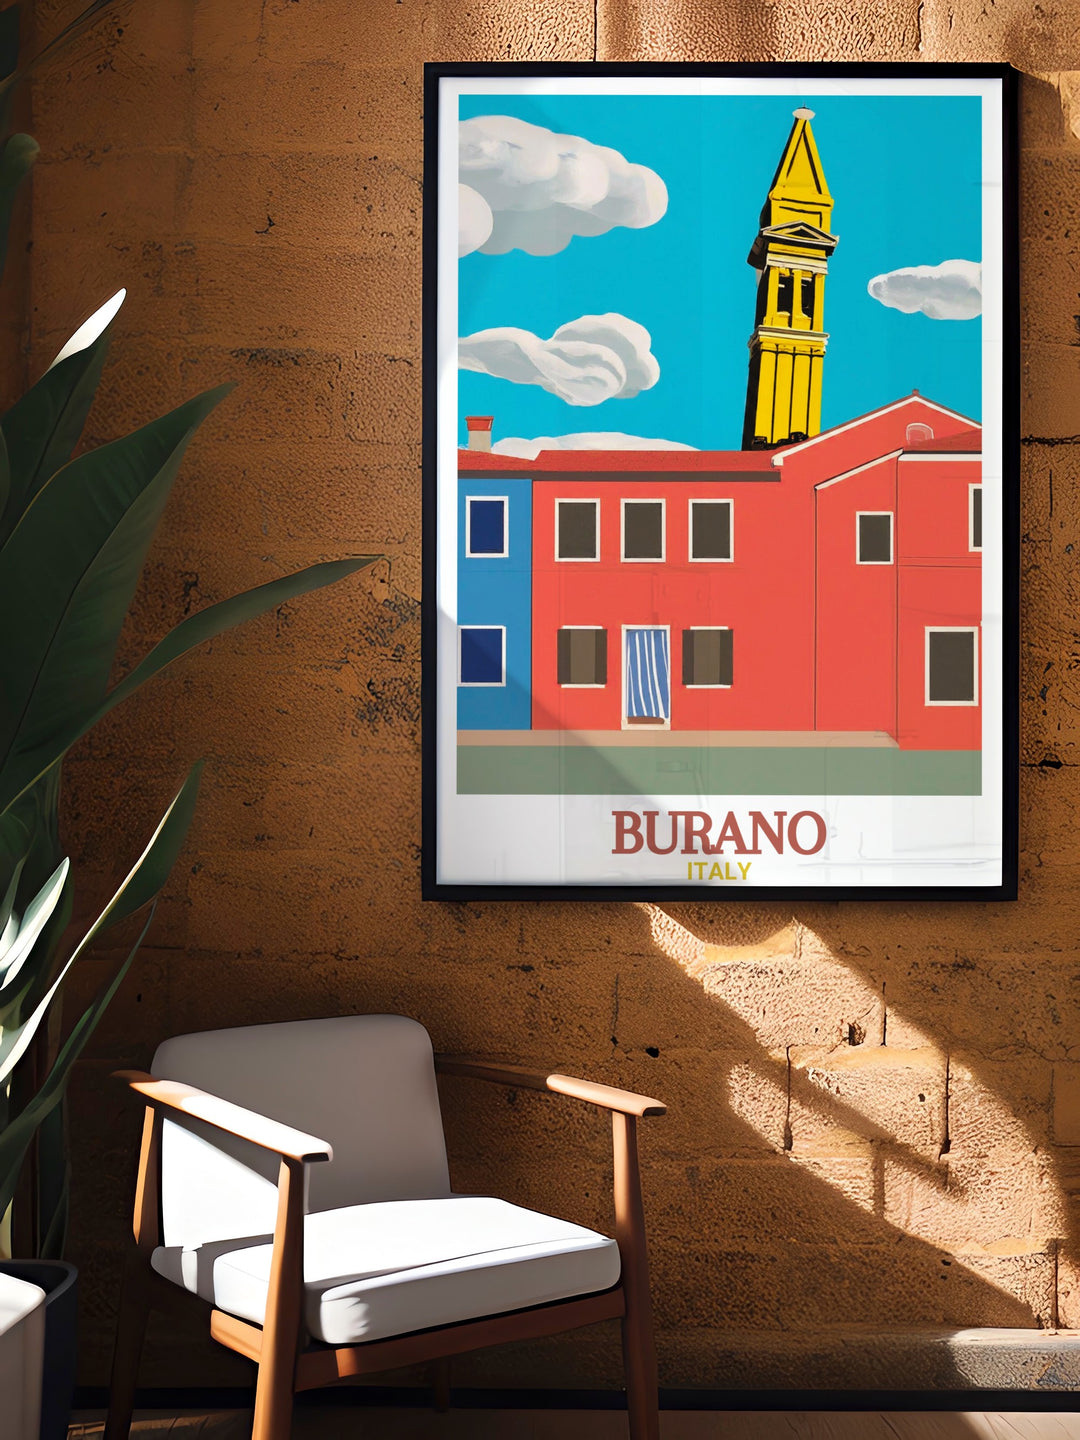 Elegant Burano Print featuring the iconic Burano skyline and the San Martino Church. This wall art is perfect for those who appreciate both vibrant cityscapes and historical architecture.